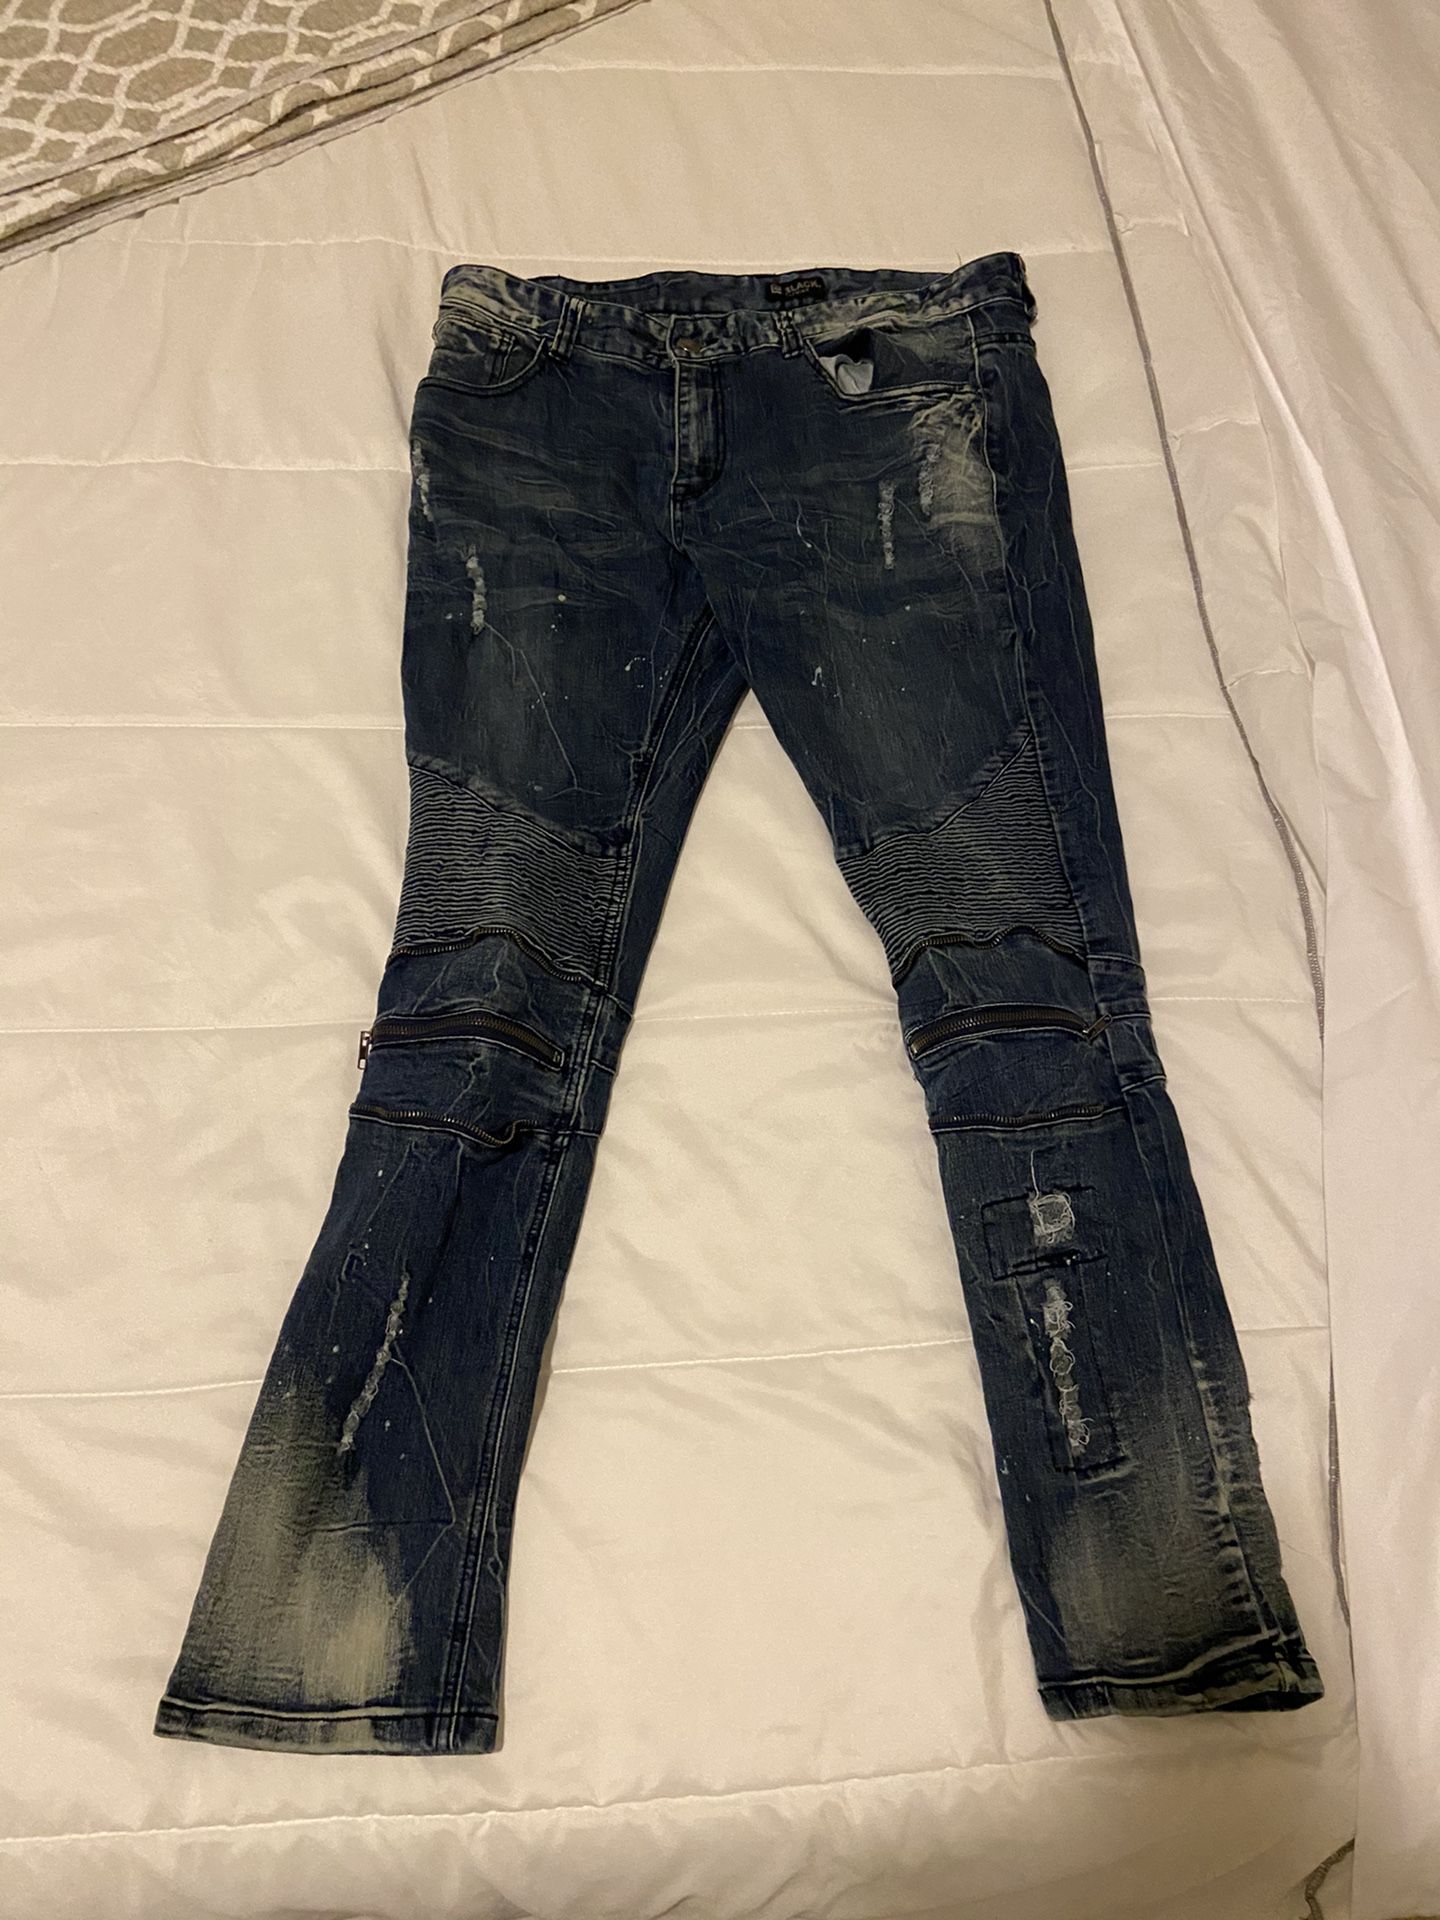 Jeans Size 38 to 40